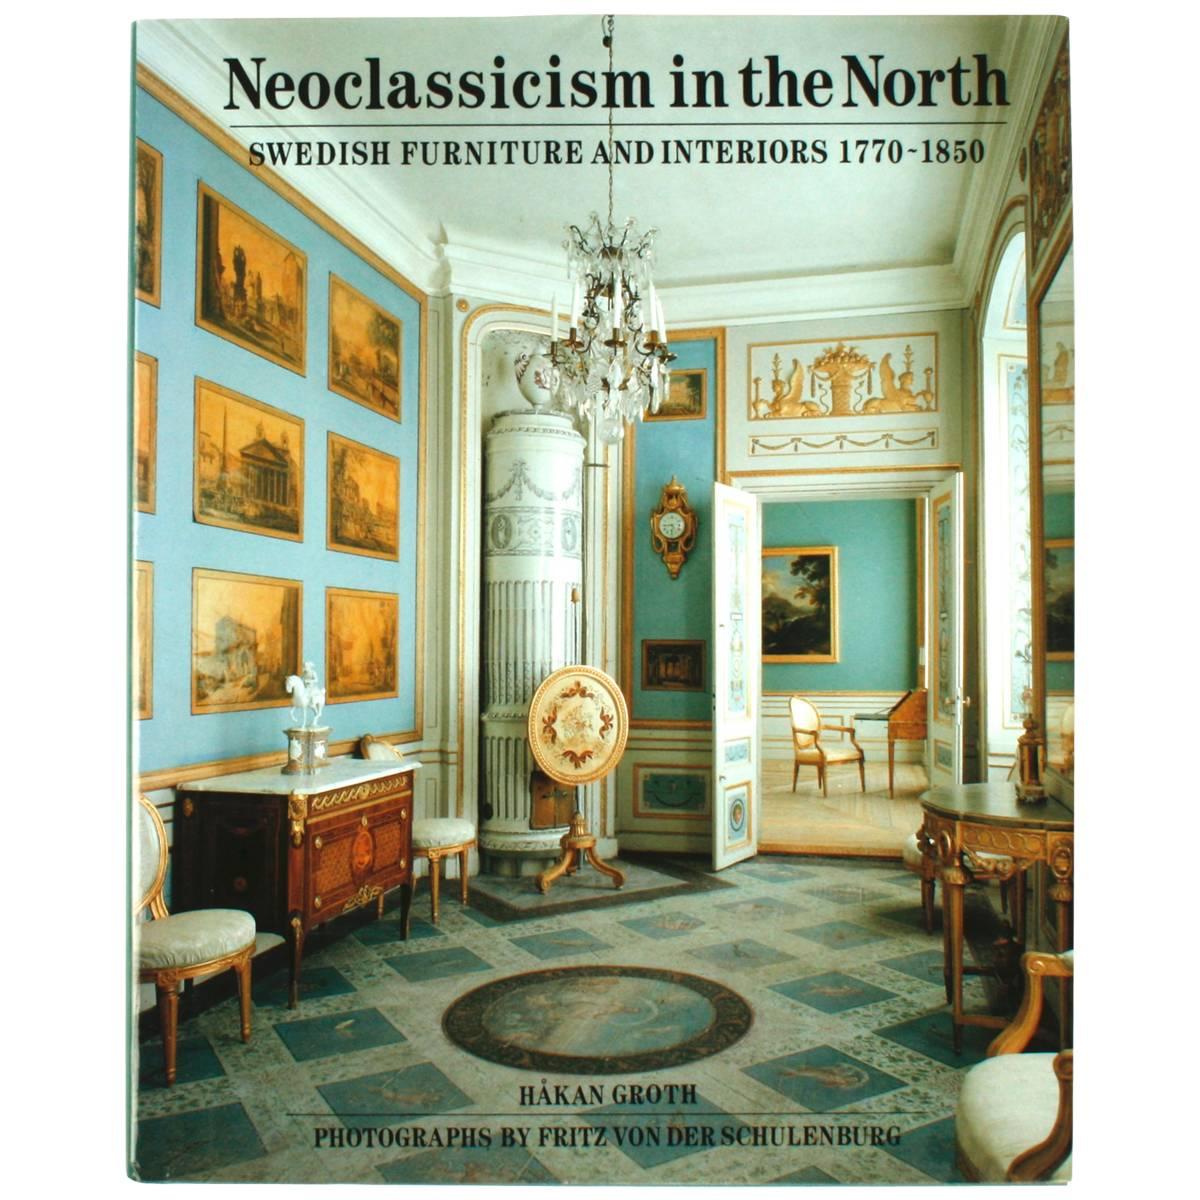 Neoclassicism in the North Swedish Furniture and Interiors, 1770-1850